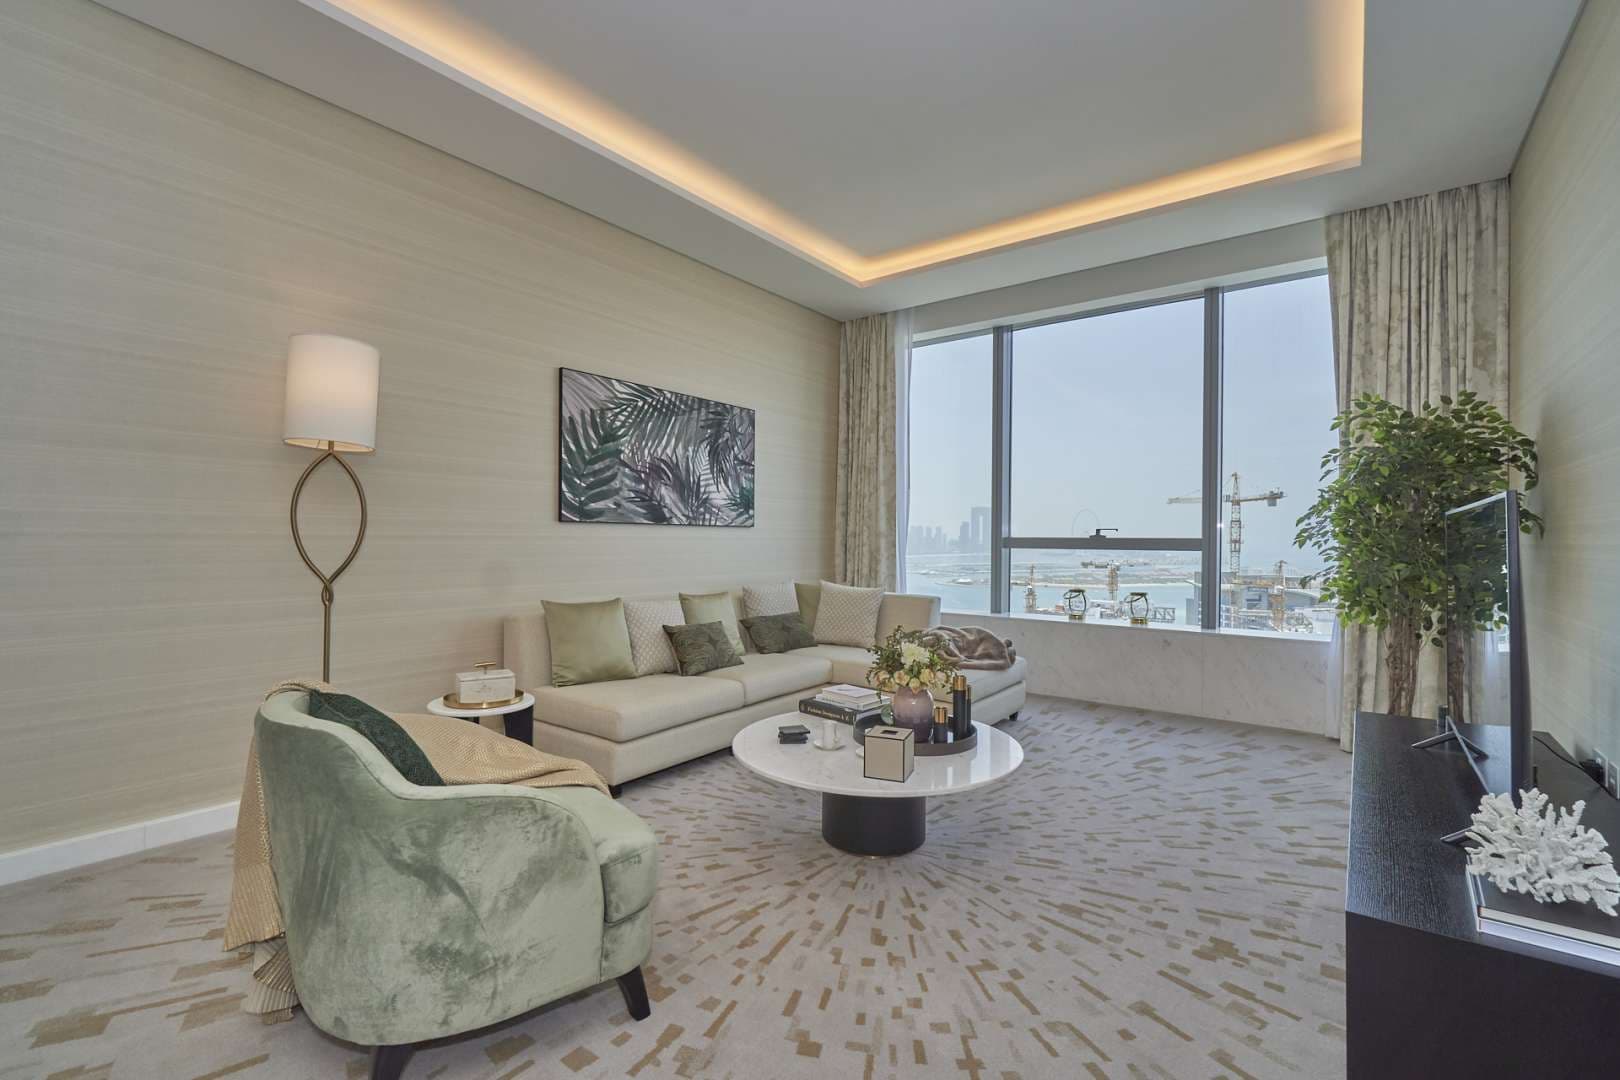 1 Bedroom Apartment For Sale The Palm Tower Lp07387 58f51c32f4bc8c0.jpg